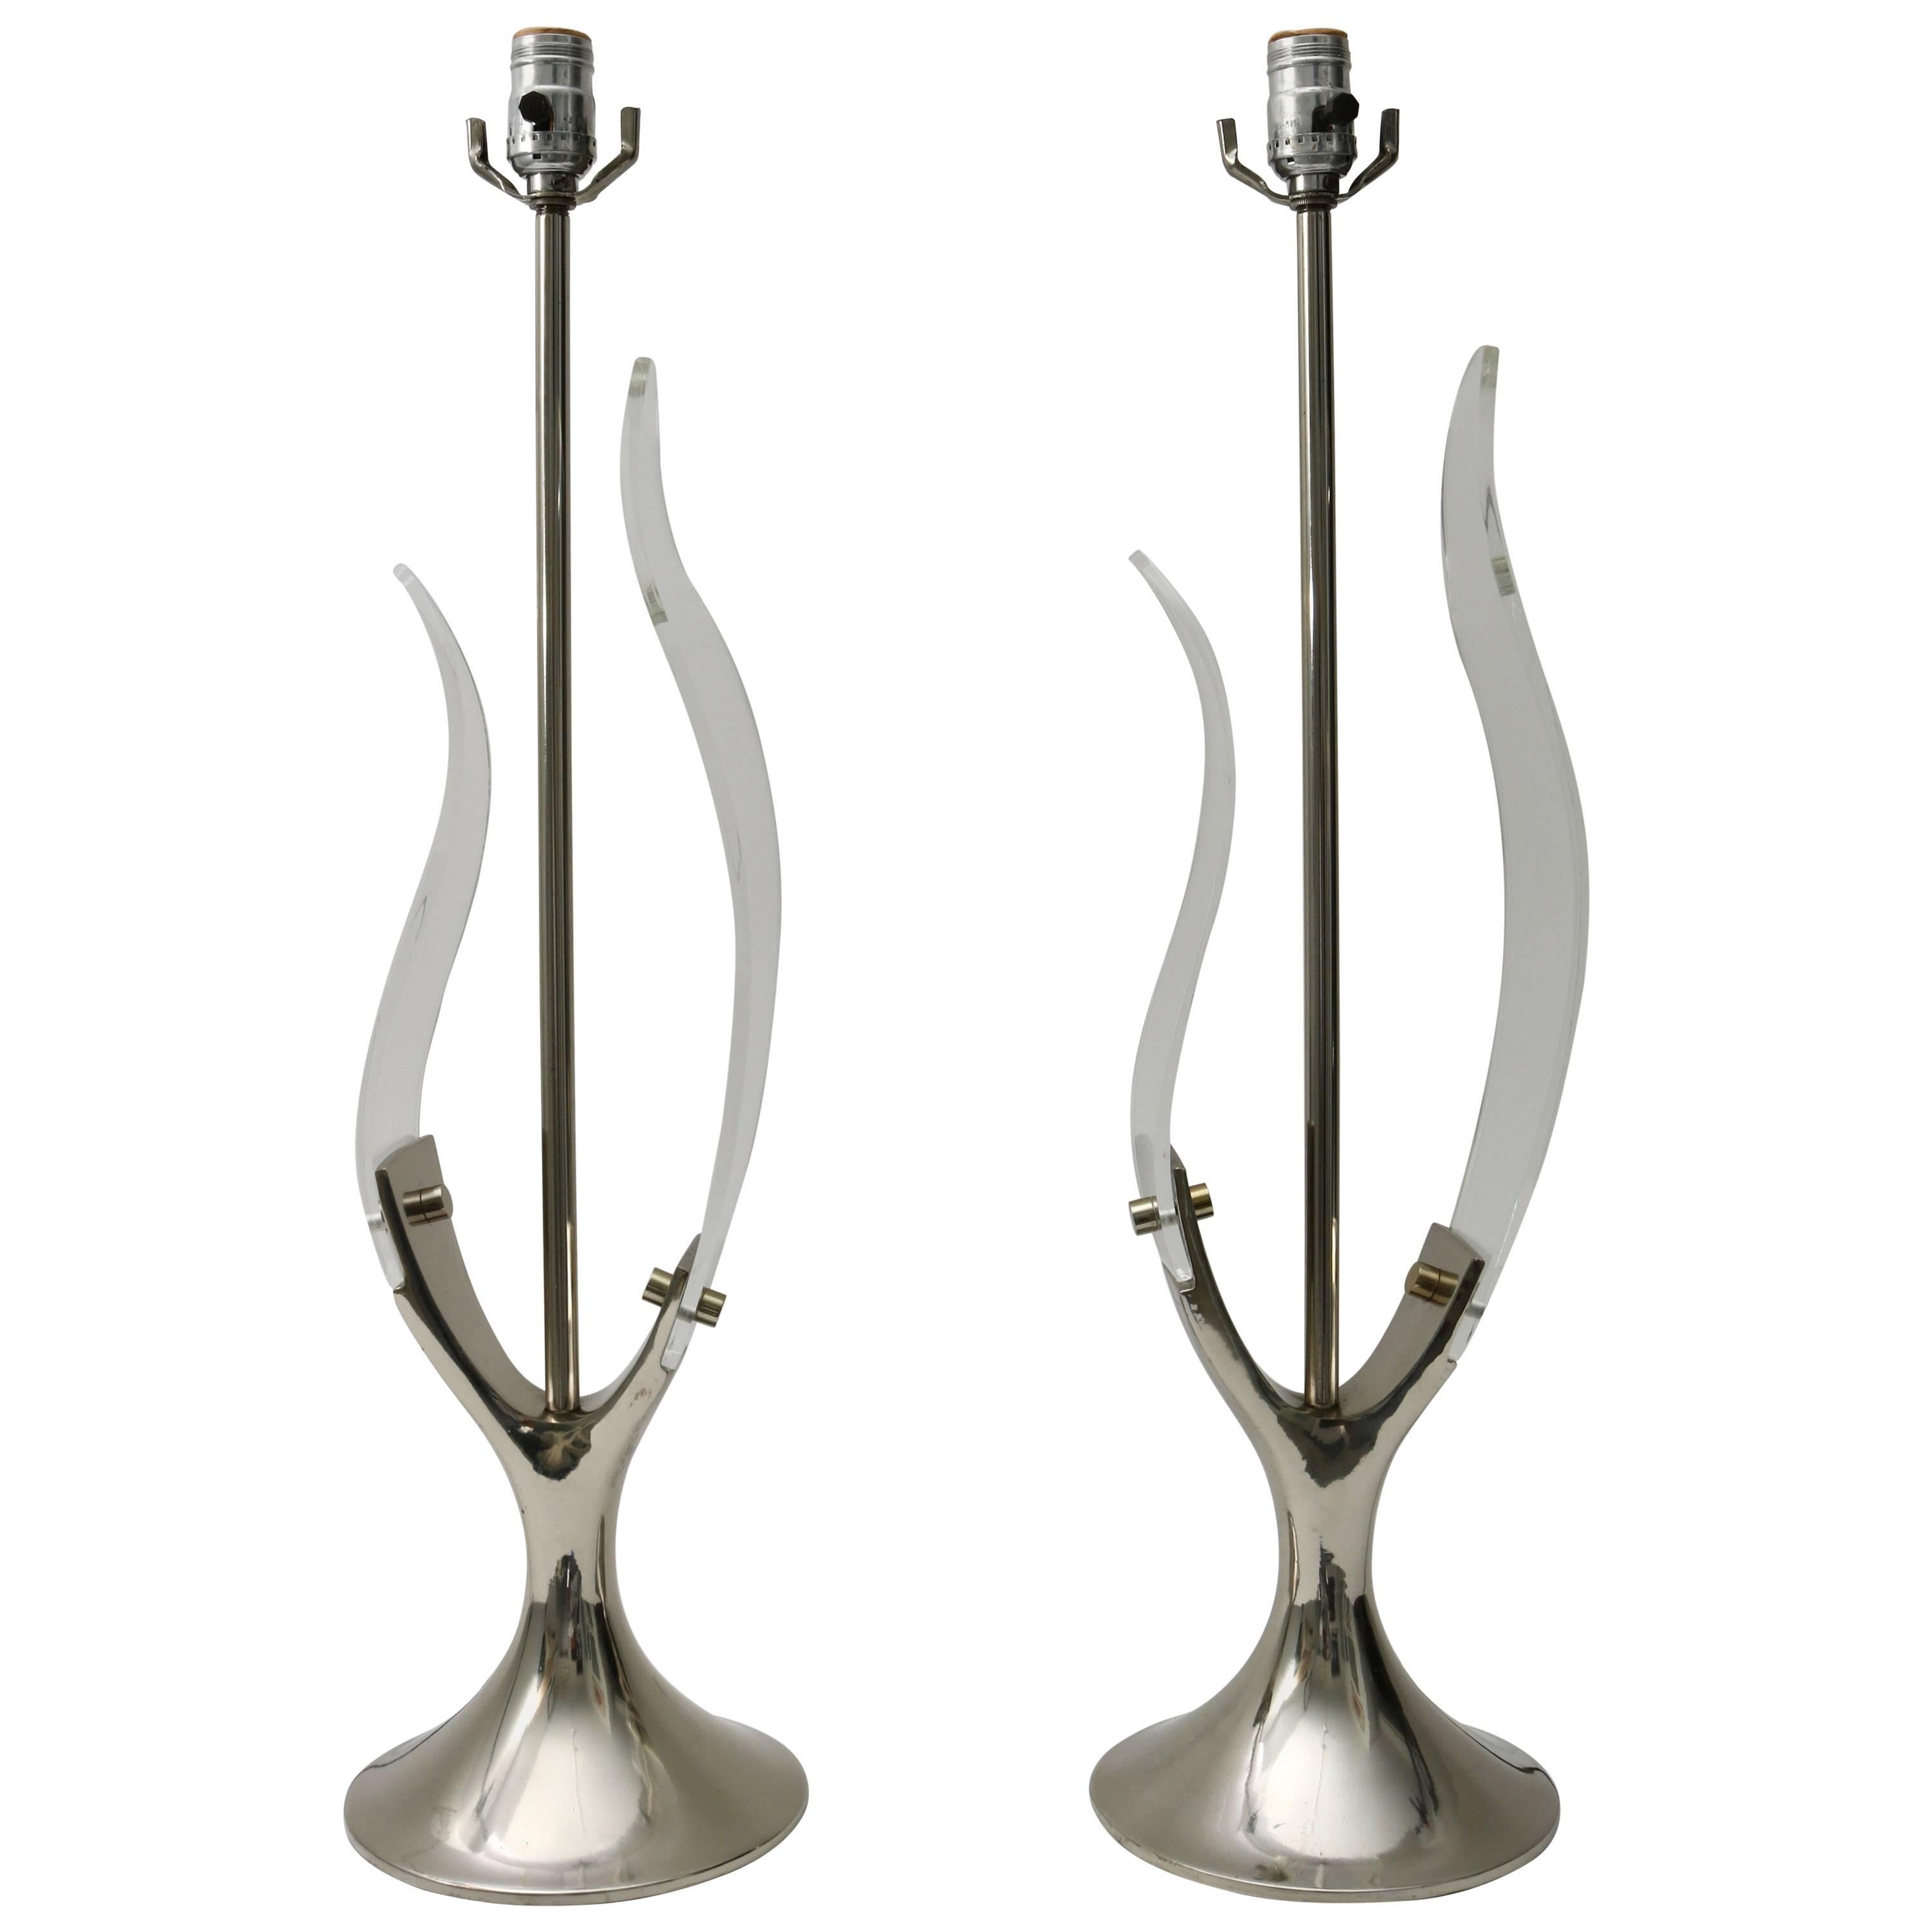 Pair of "Tulip" Table Lamps by Laurel Lamp Company